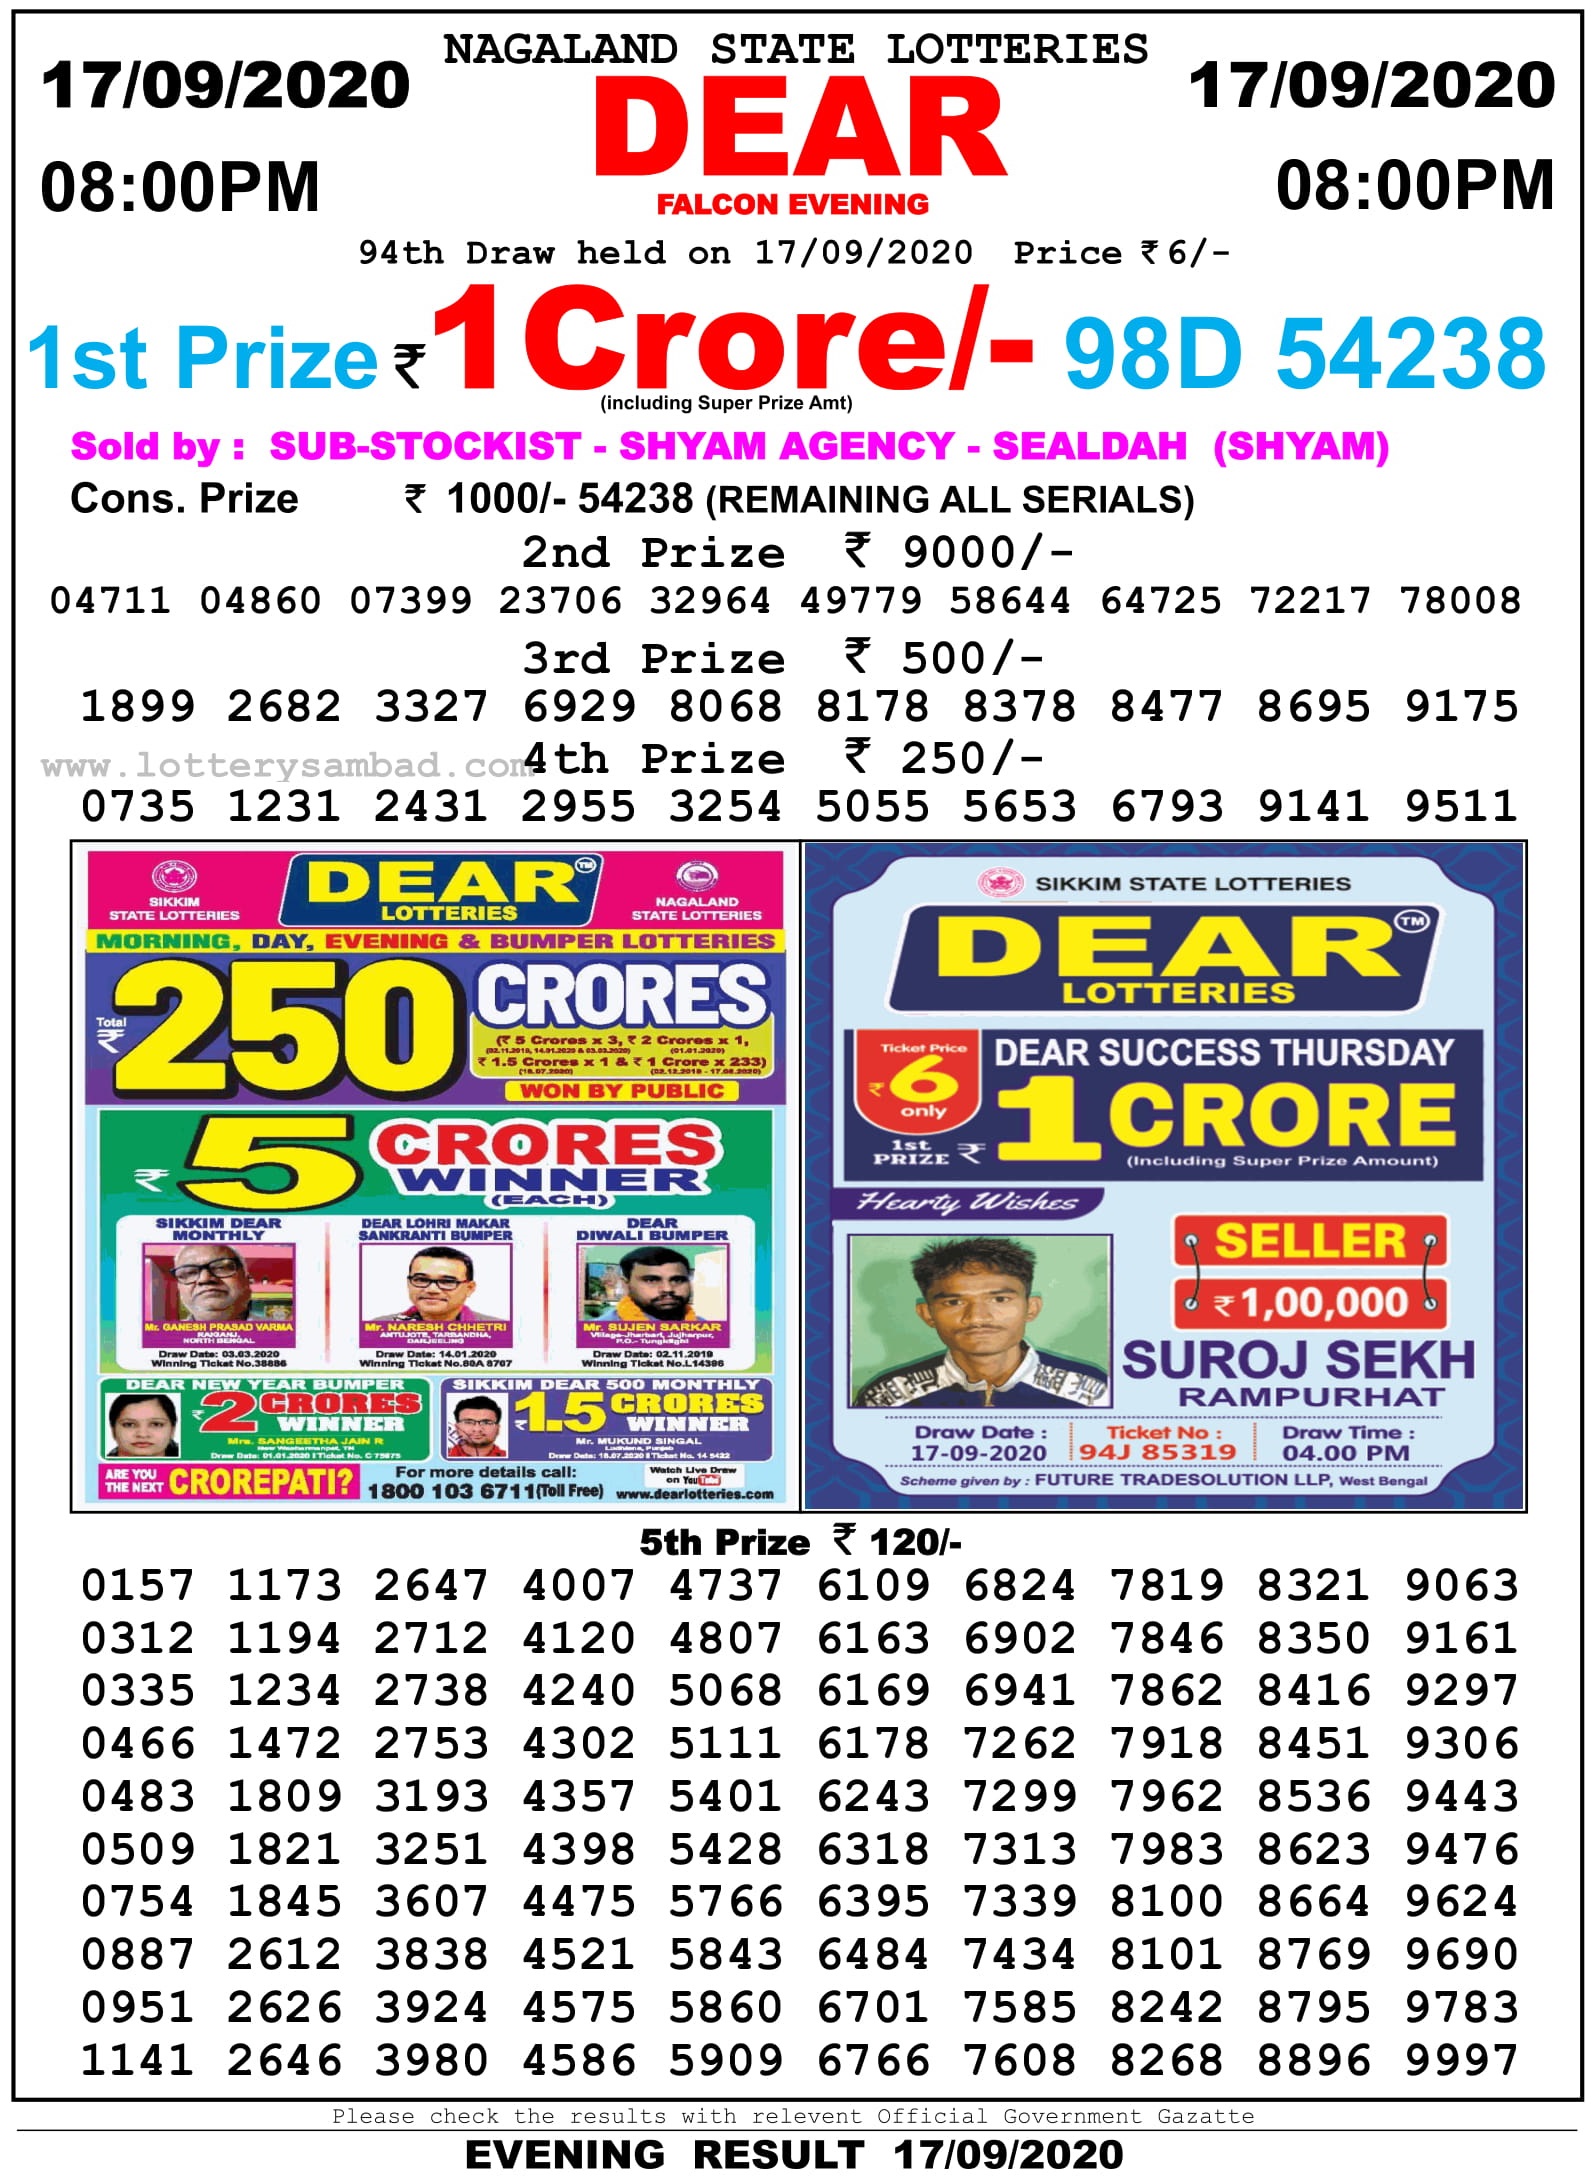 Nagaland State Lottery Result 8 PM 18.9.2020